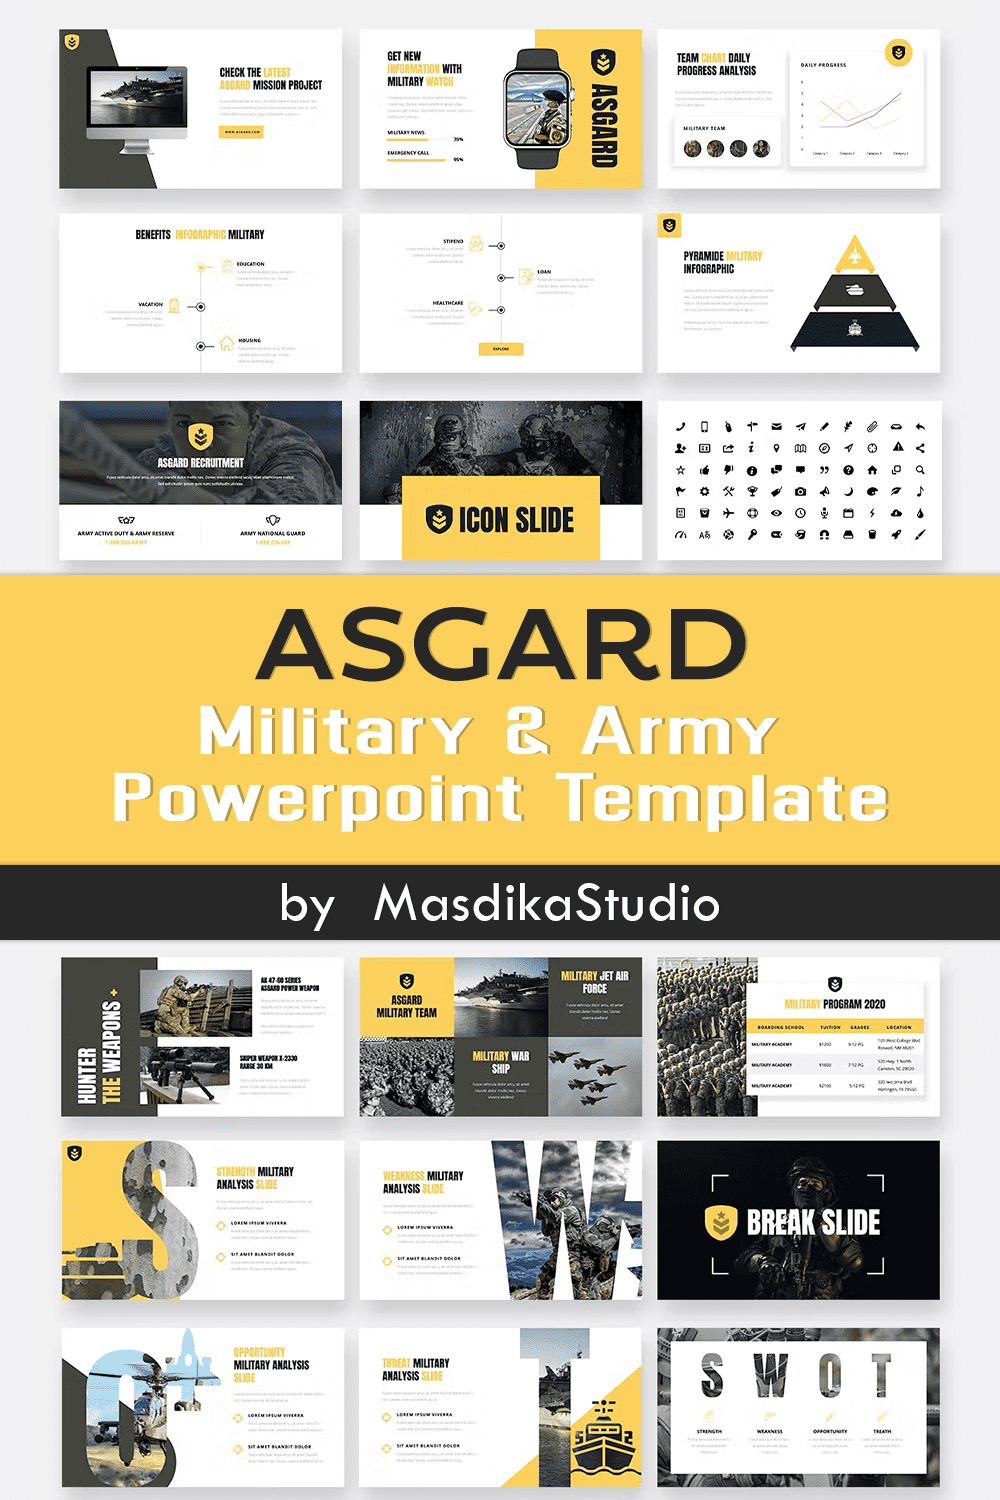 Asgard - Military and Army Powerpoint Template - Pinterest.